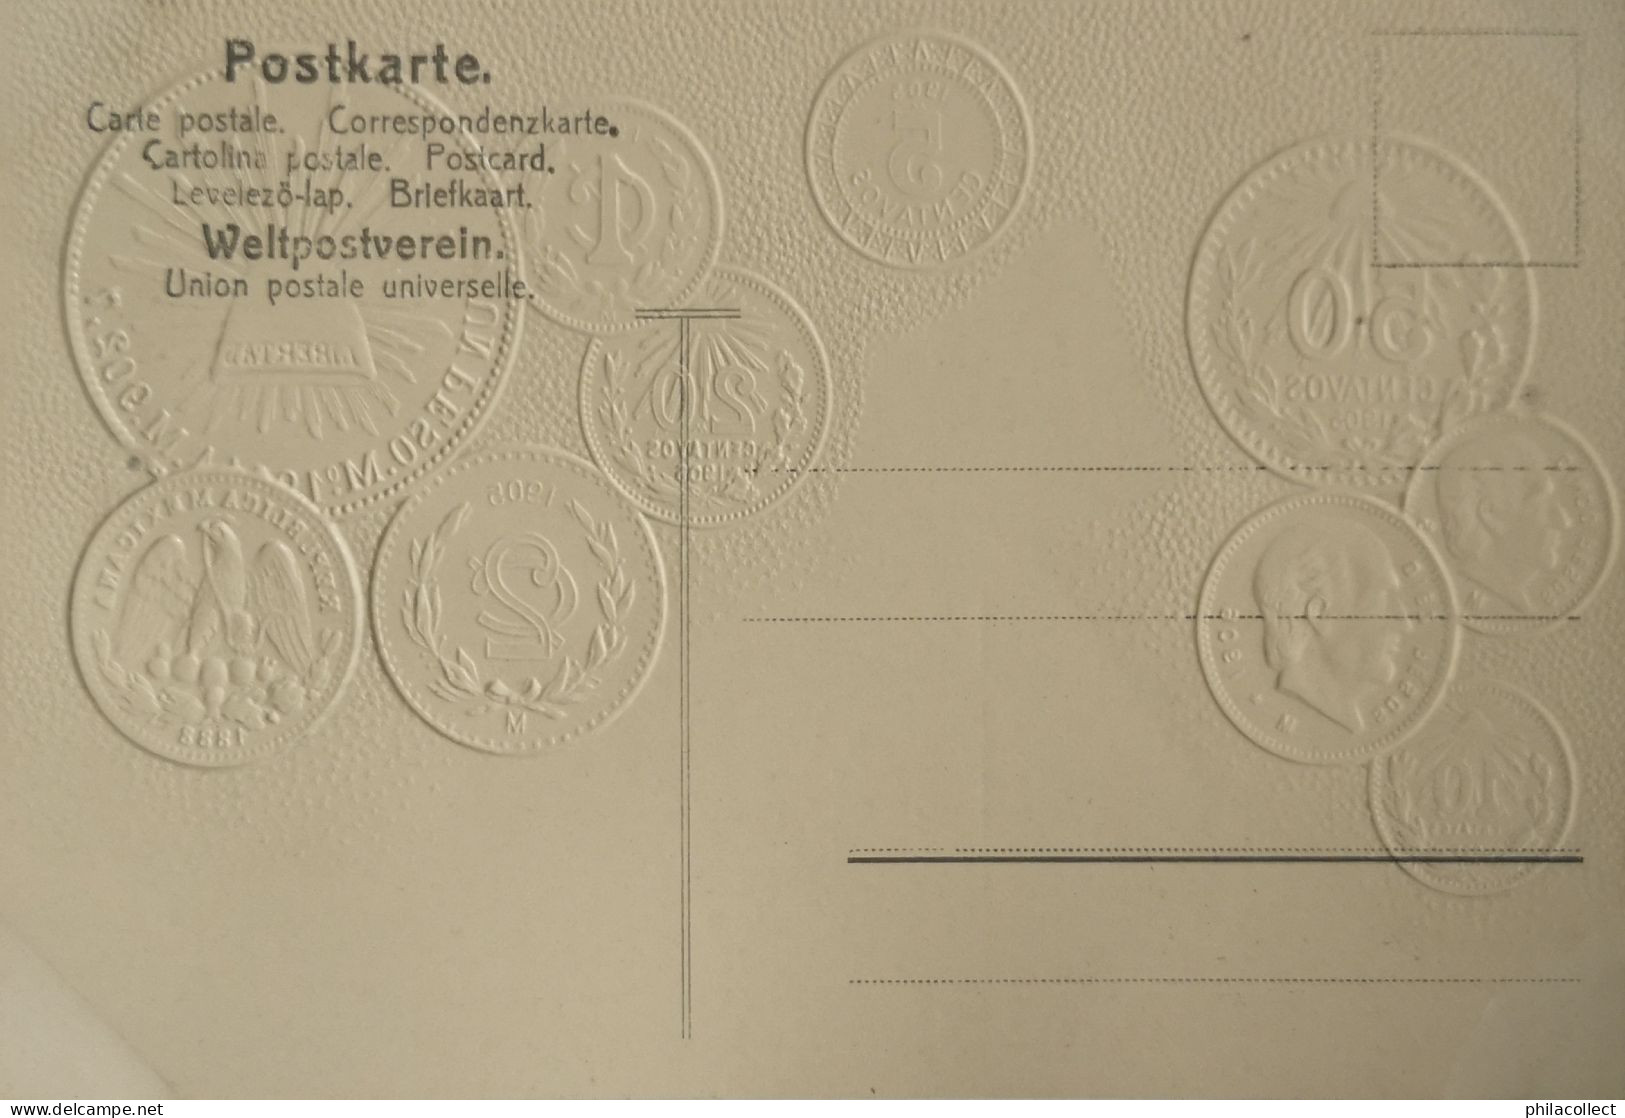 Mexiko - Mexico // Münzkarte Prägedruck - Coin Card Embossed  19?? - Coins (pictures)